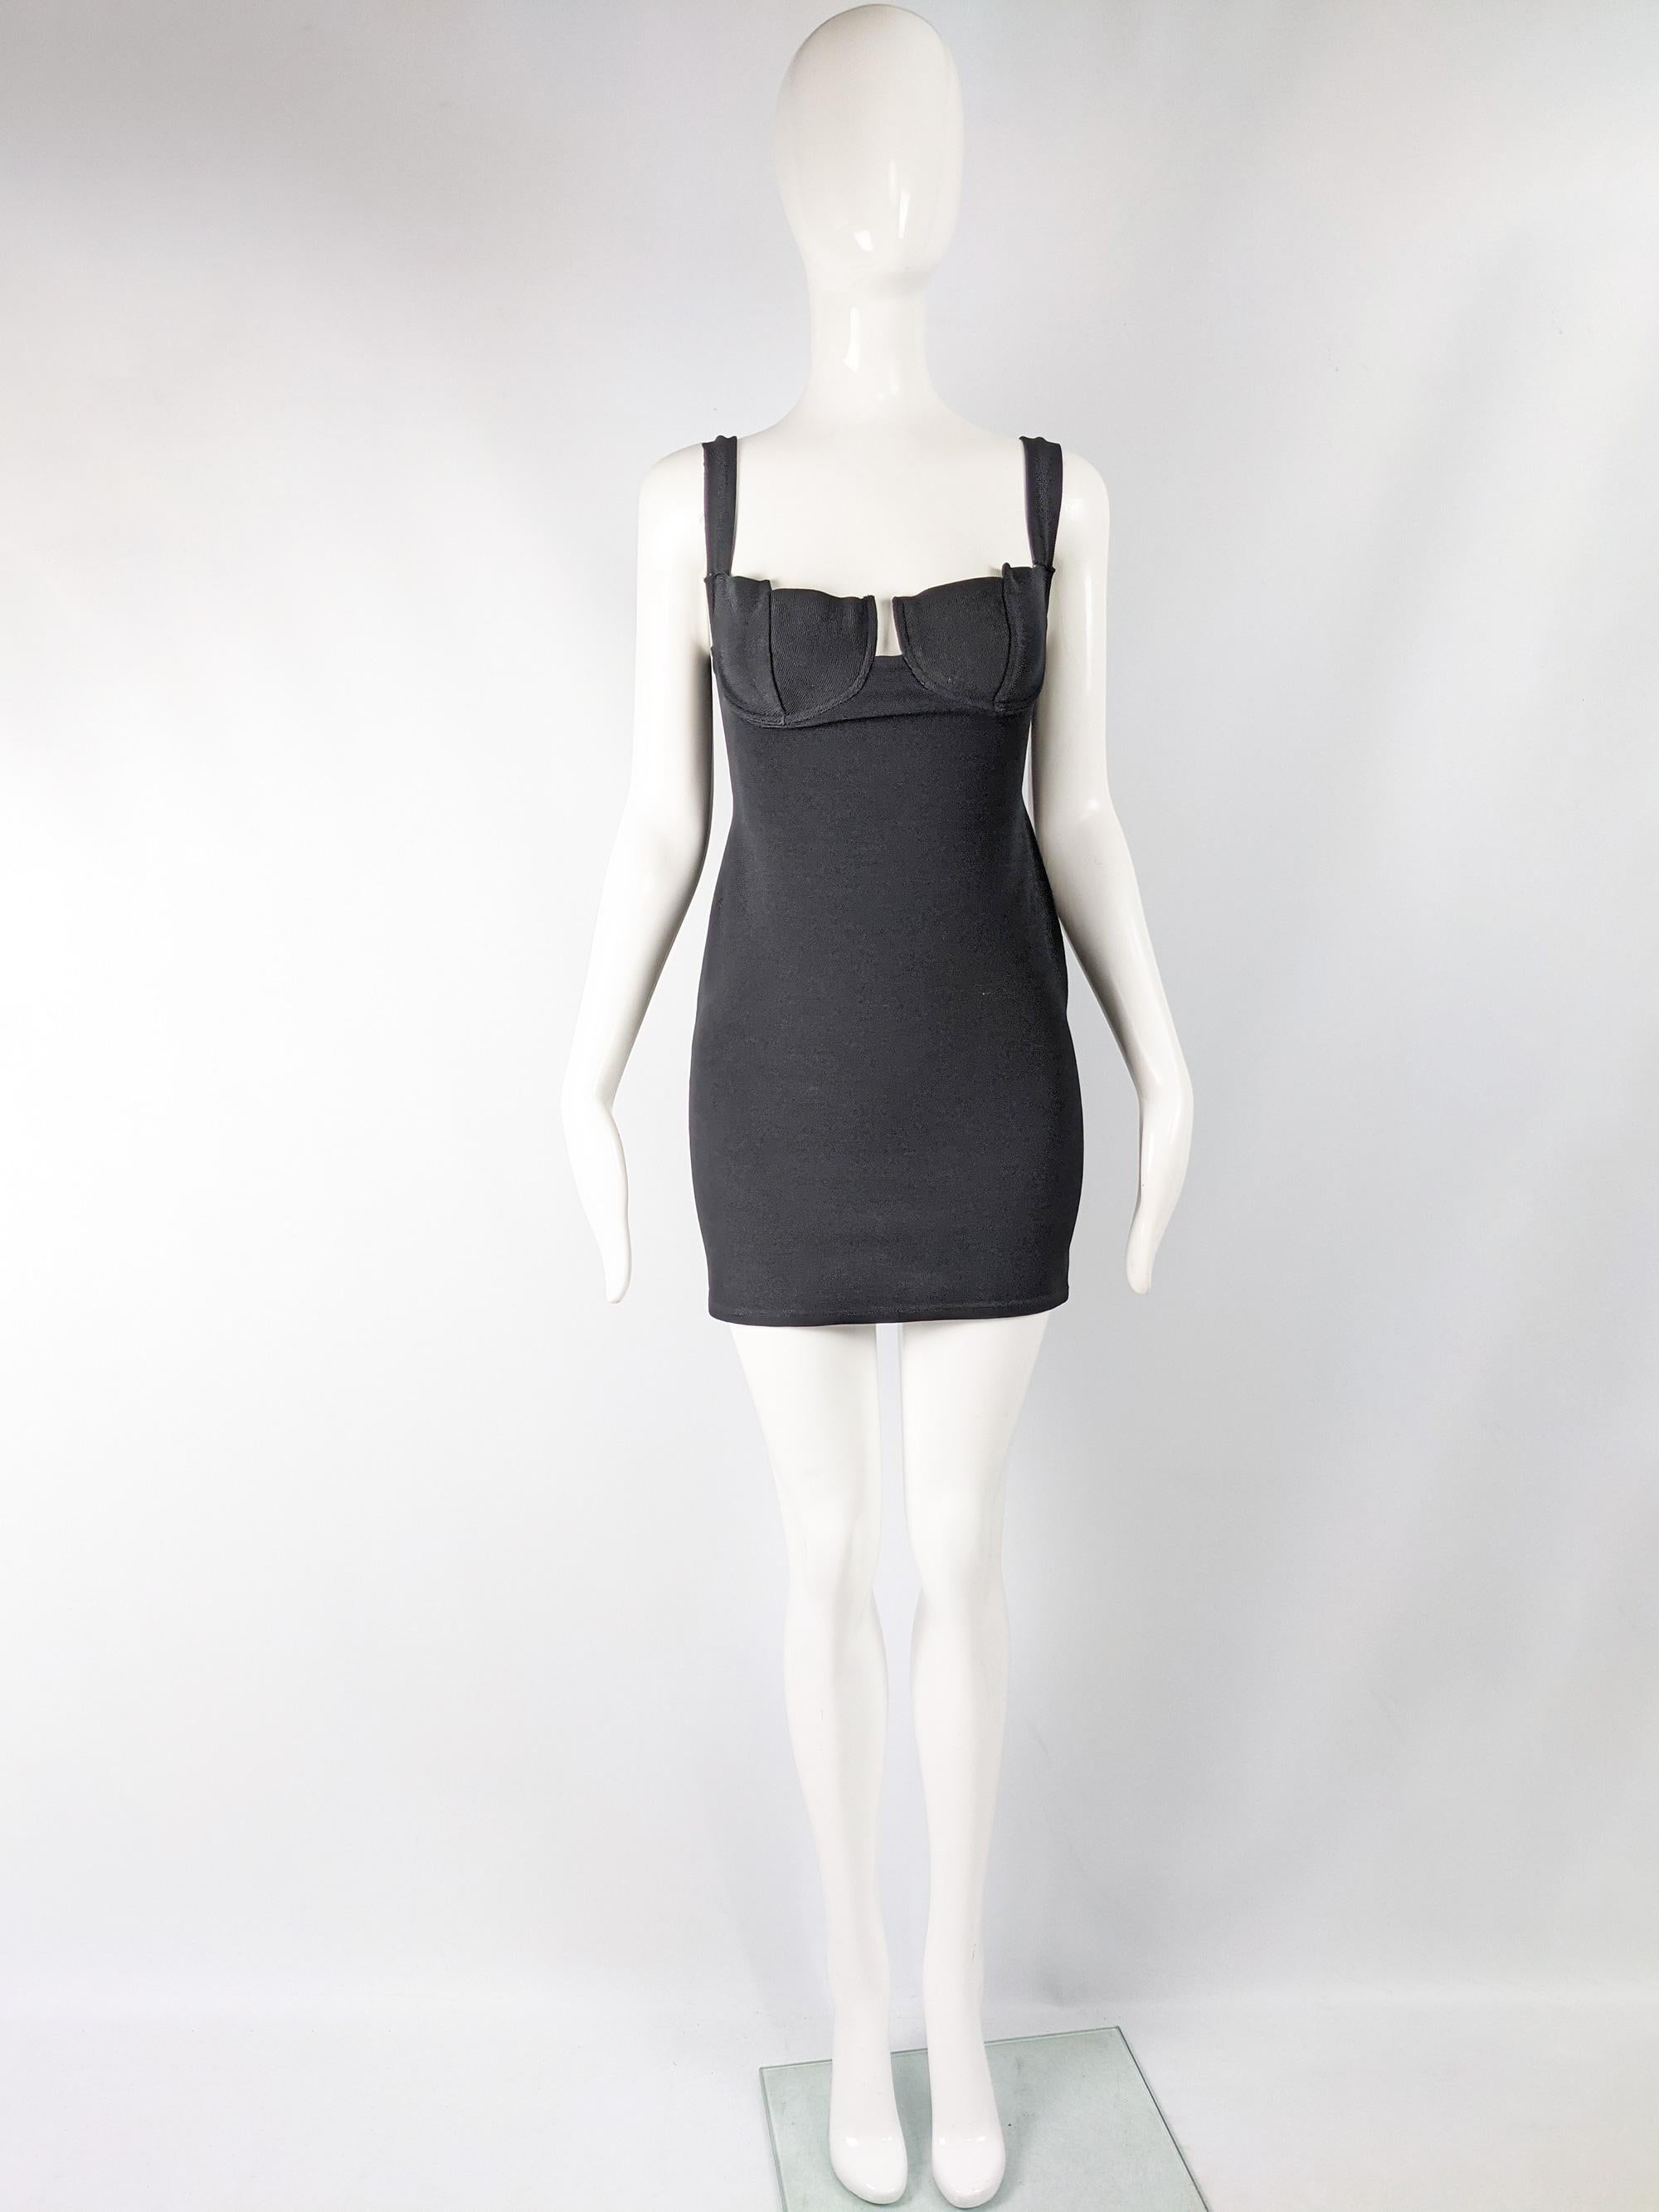 A sexy and chic vintage women's mini dress from the 90s by high quality but little known French fashion designer, Andrea Templer. In a black, stretchy ribbed lycra and polyamide blend that gives a great body conscious fit which complements the